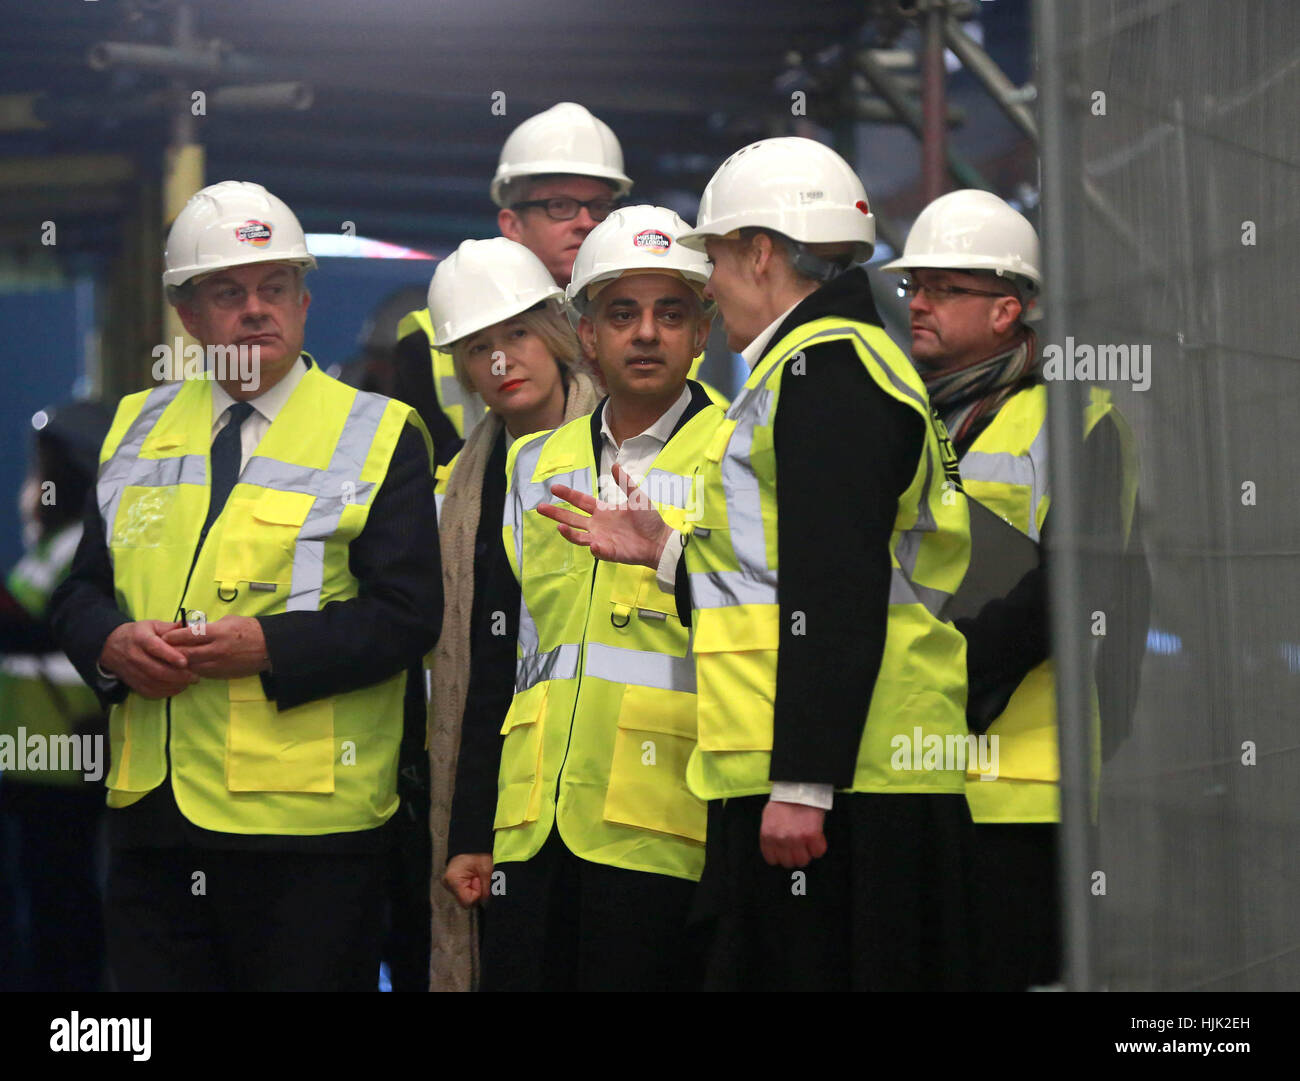 EDITORIAL USE ONLY Sharon Ament, Director of the Museum of London (right), speaks to Mayor of London Sadiq Khan (centre), Justine Simons, Deputy Mayor for Culture and the Creative Industries (2nd left) and Mark Boleat, Chairman of the Policy and Resources Committee at the City of London Corporation (left), during a visit to Smithfield General Market. Plans for a new Museum of London at West Smithfield have been given a major boost thanks to support from the City of London Corporation and the Mayor, who have pledged &Acirc;&pound;110 million and &Acirc;&pound;70 million respectively. Stock Photo